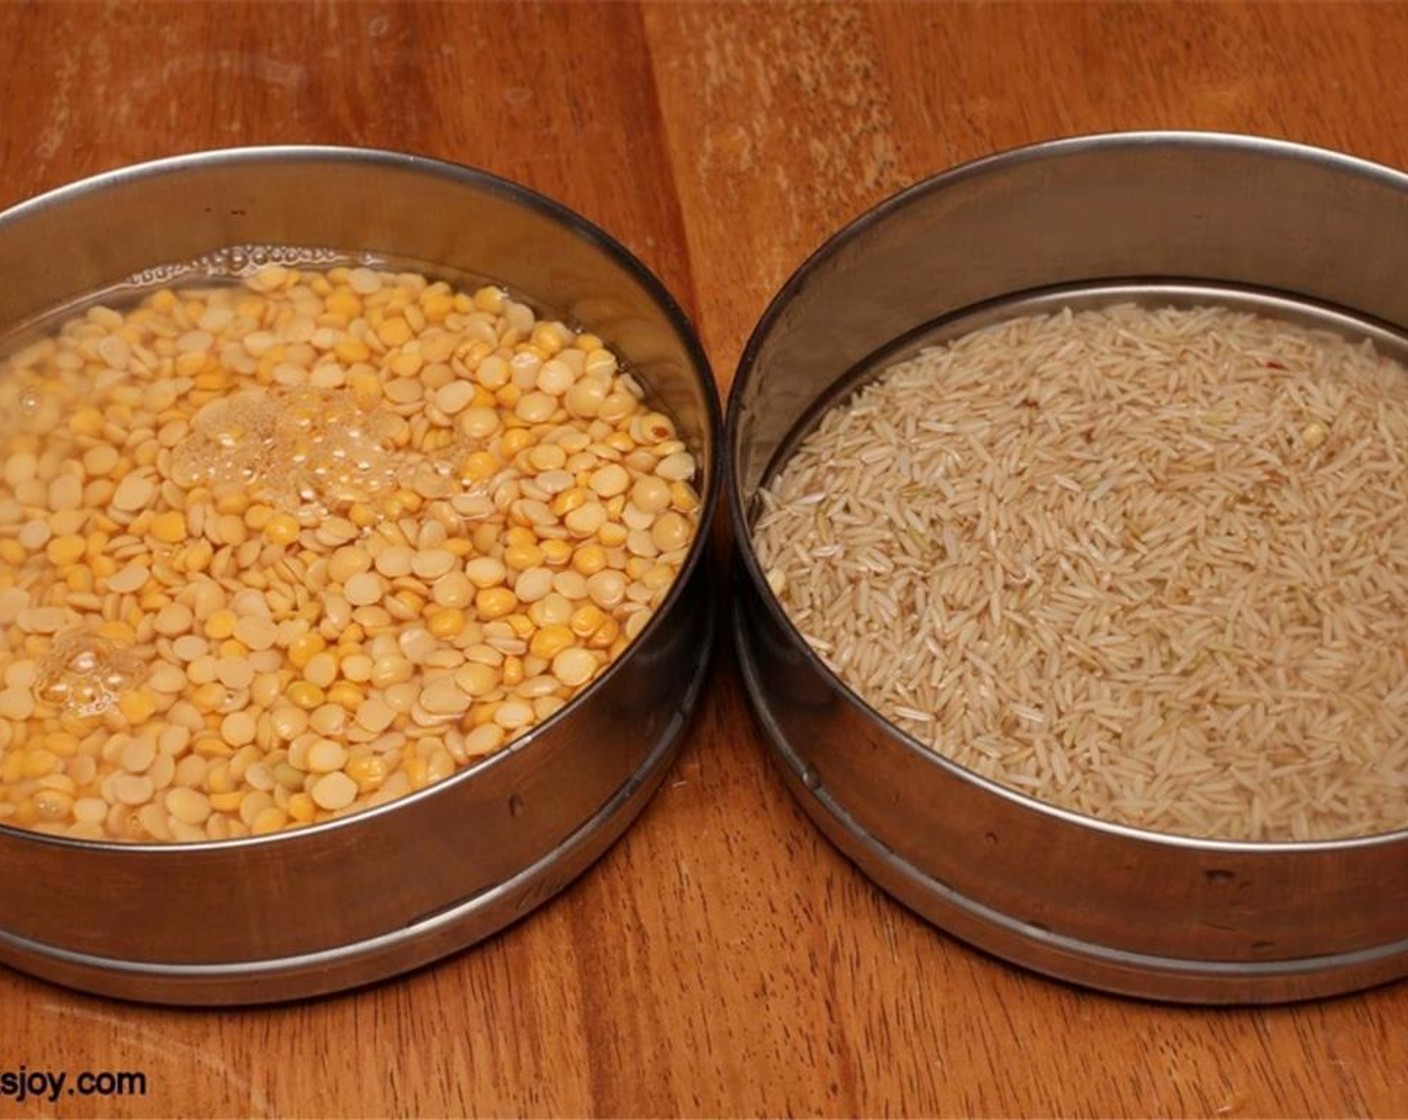 step 1 Soak Brown Rice (1 cup) for 4 hours. Soak Pigeon Peas (1/2 cup) and Chana Dal (1/2 cup) for 2 hours.